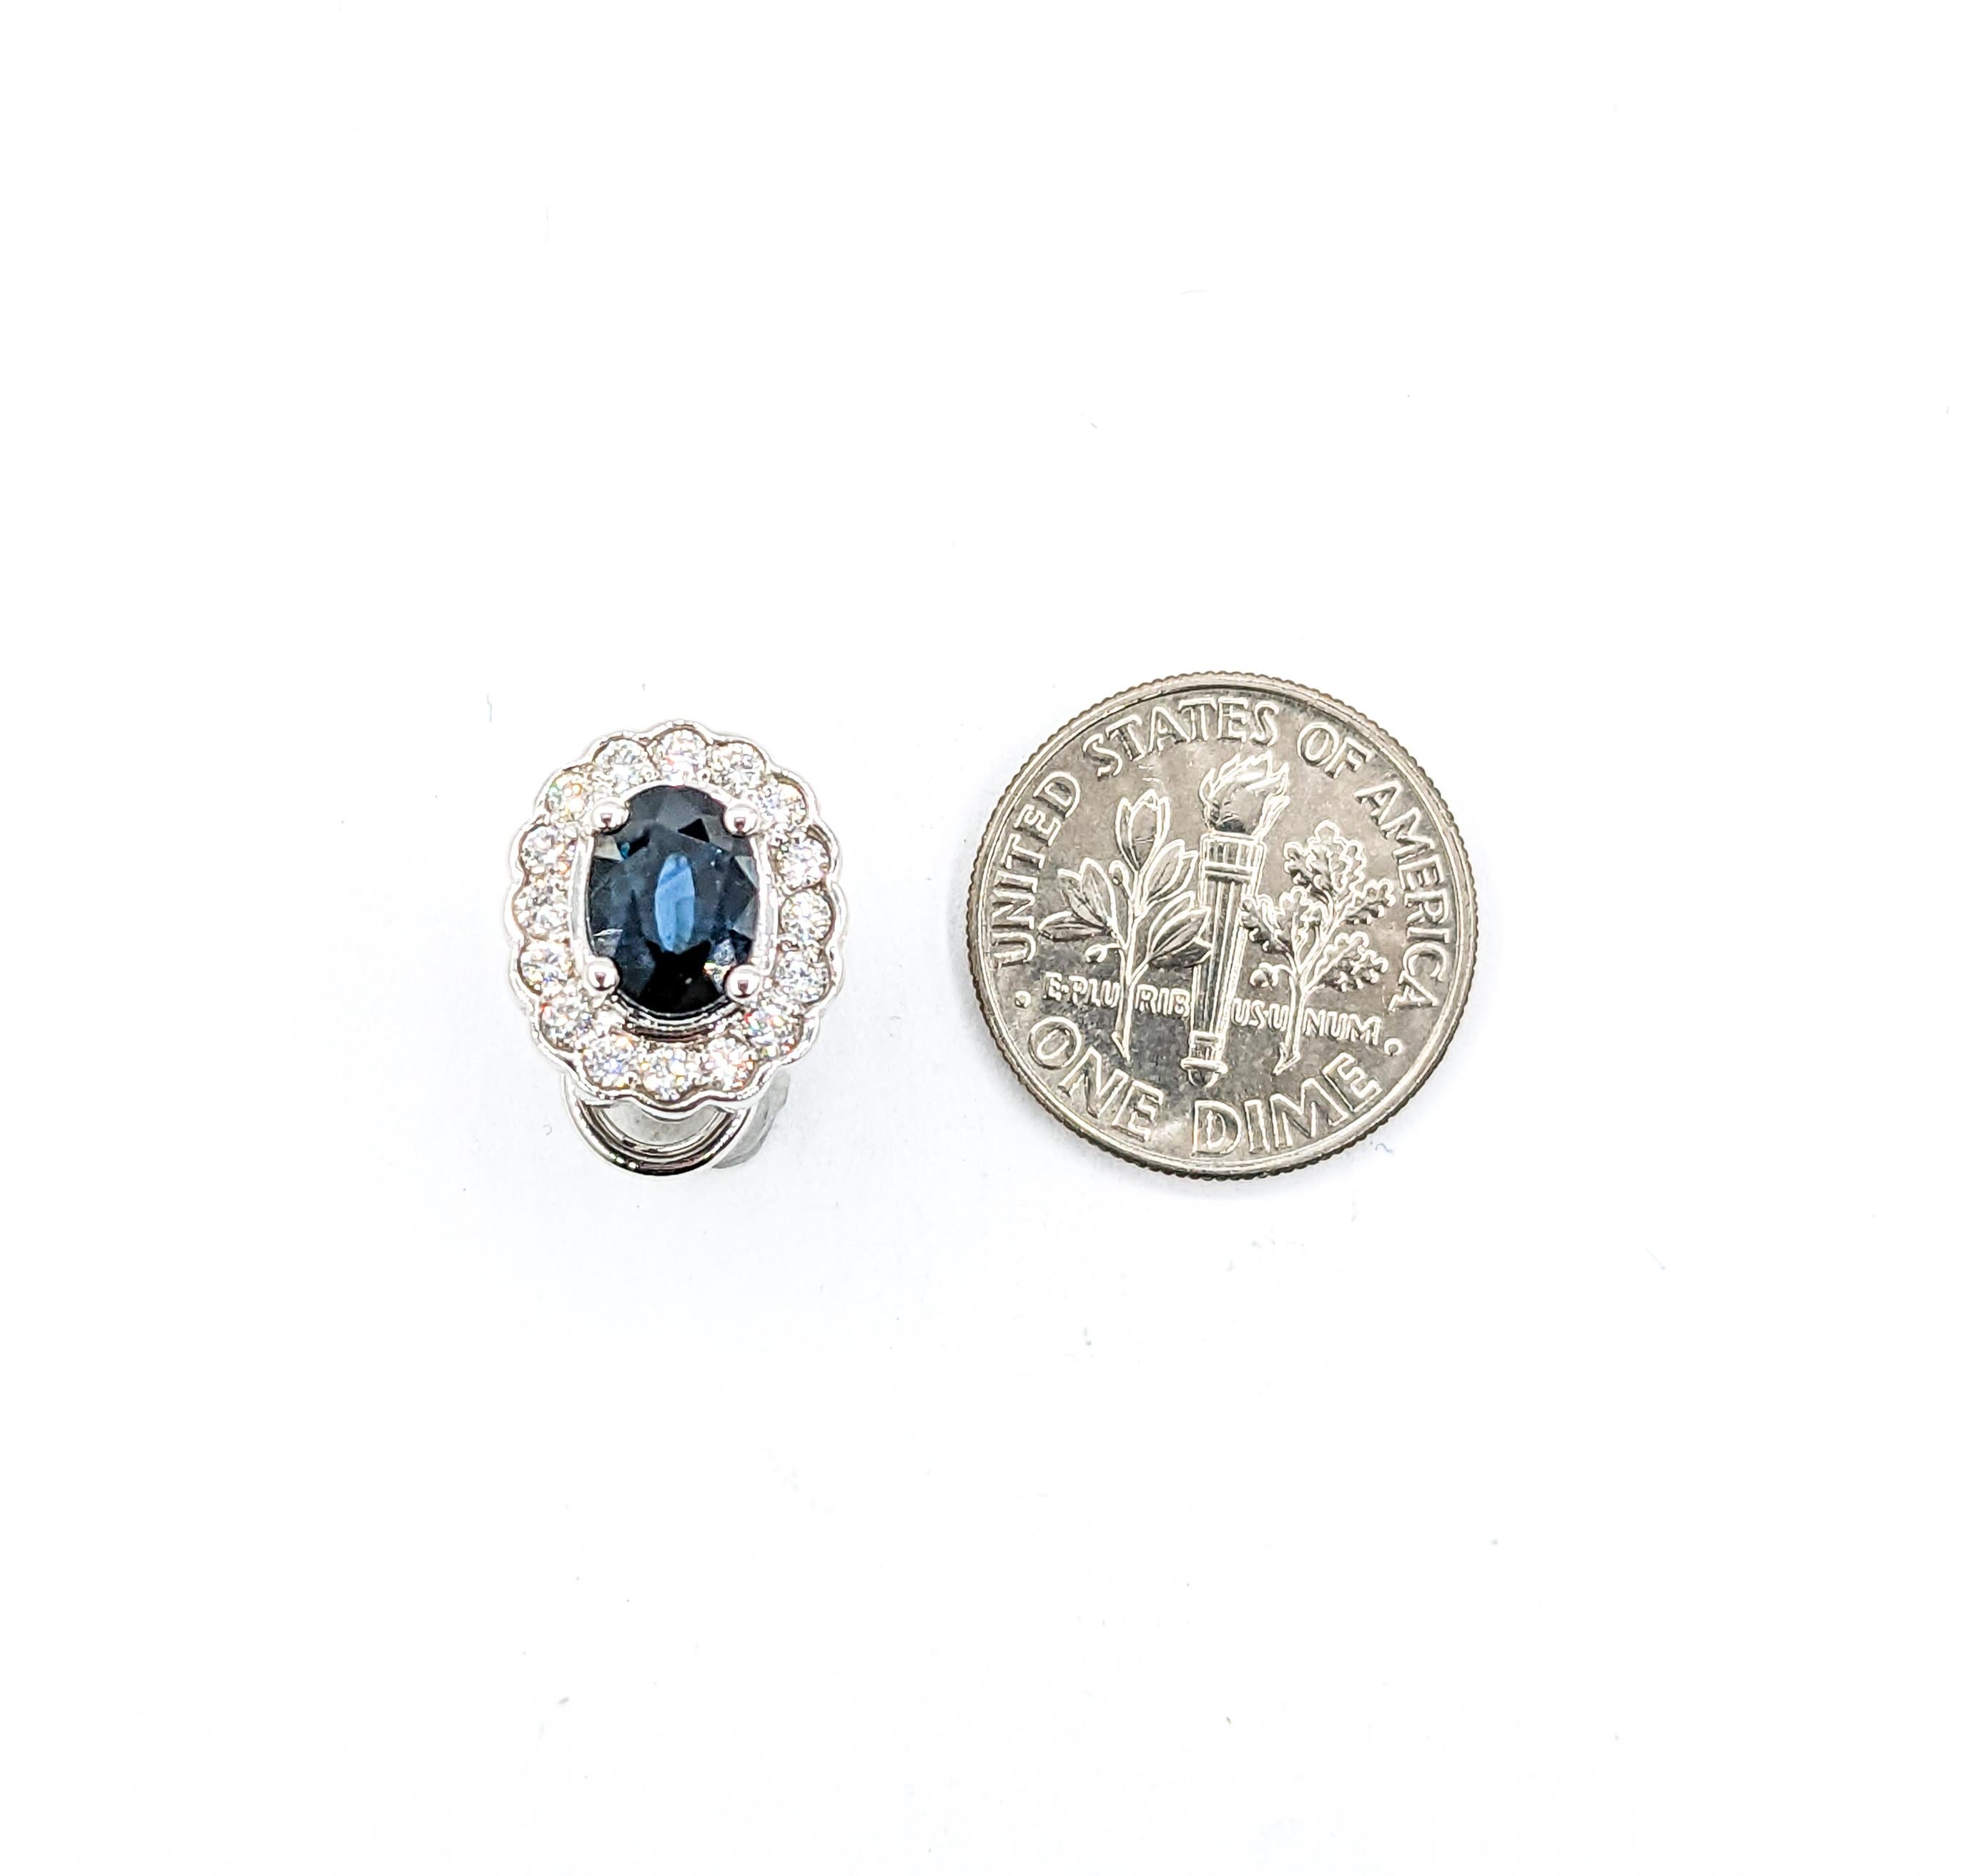  Exquisite Sapphire and White Diamond Earrings In White Gold

Presenting these stunning stud earrings, masterfully crafted from 14kt white gold. Center stage is taken by 2.52ctw of mesmerizing oval-cut blue sapphires, each encircled by a halo of